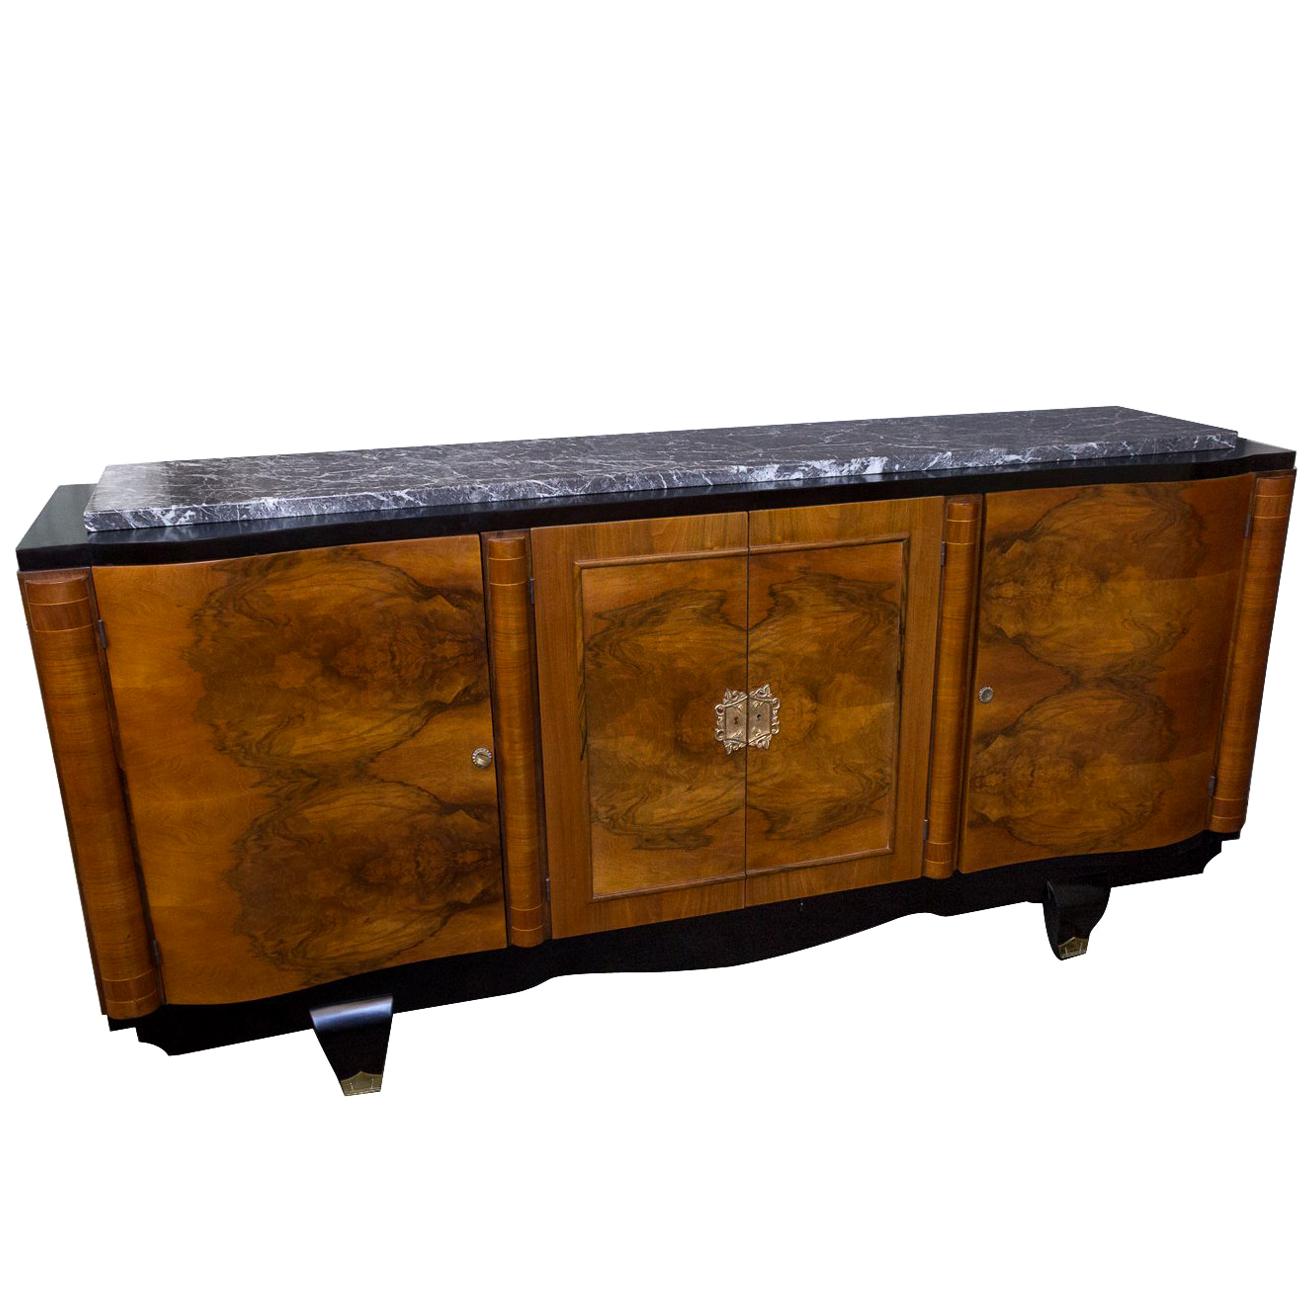 1940s Parisian Walnut Sideboard with Original Marble Surface